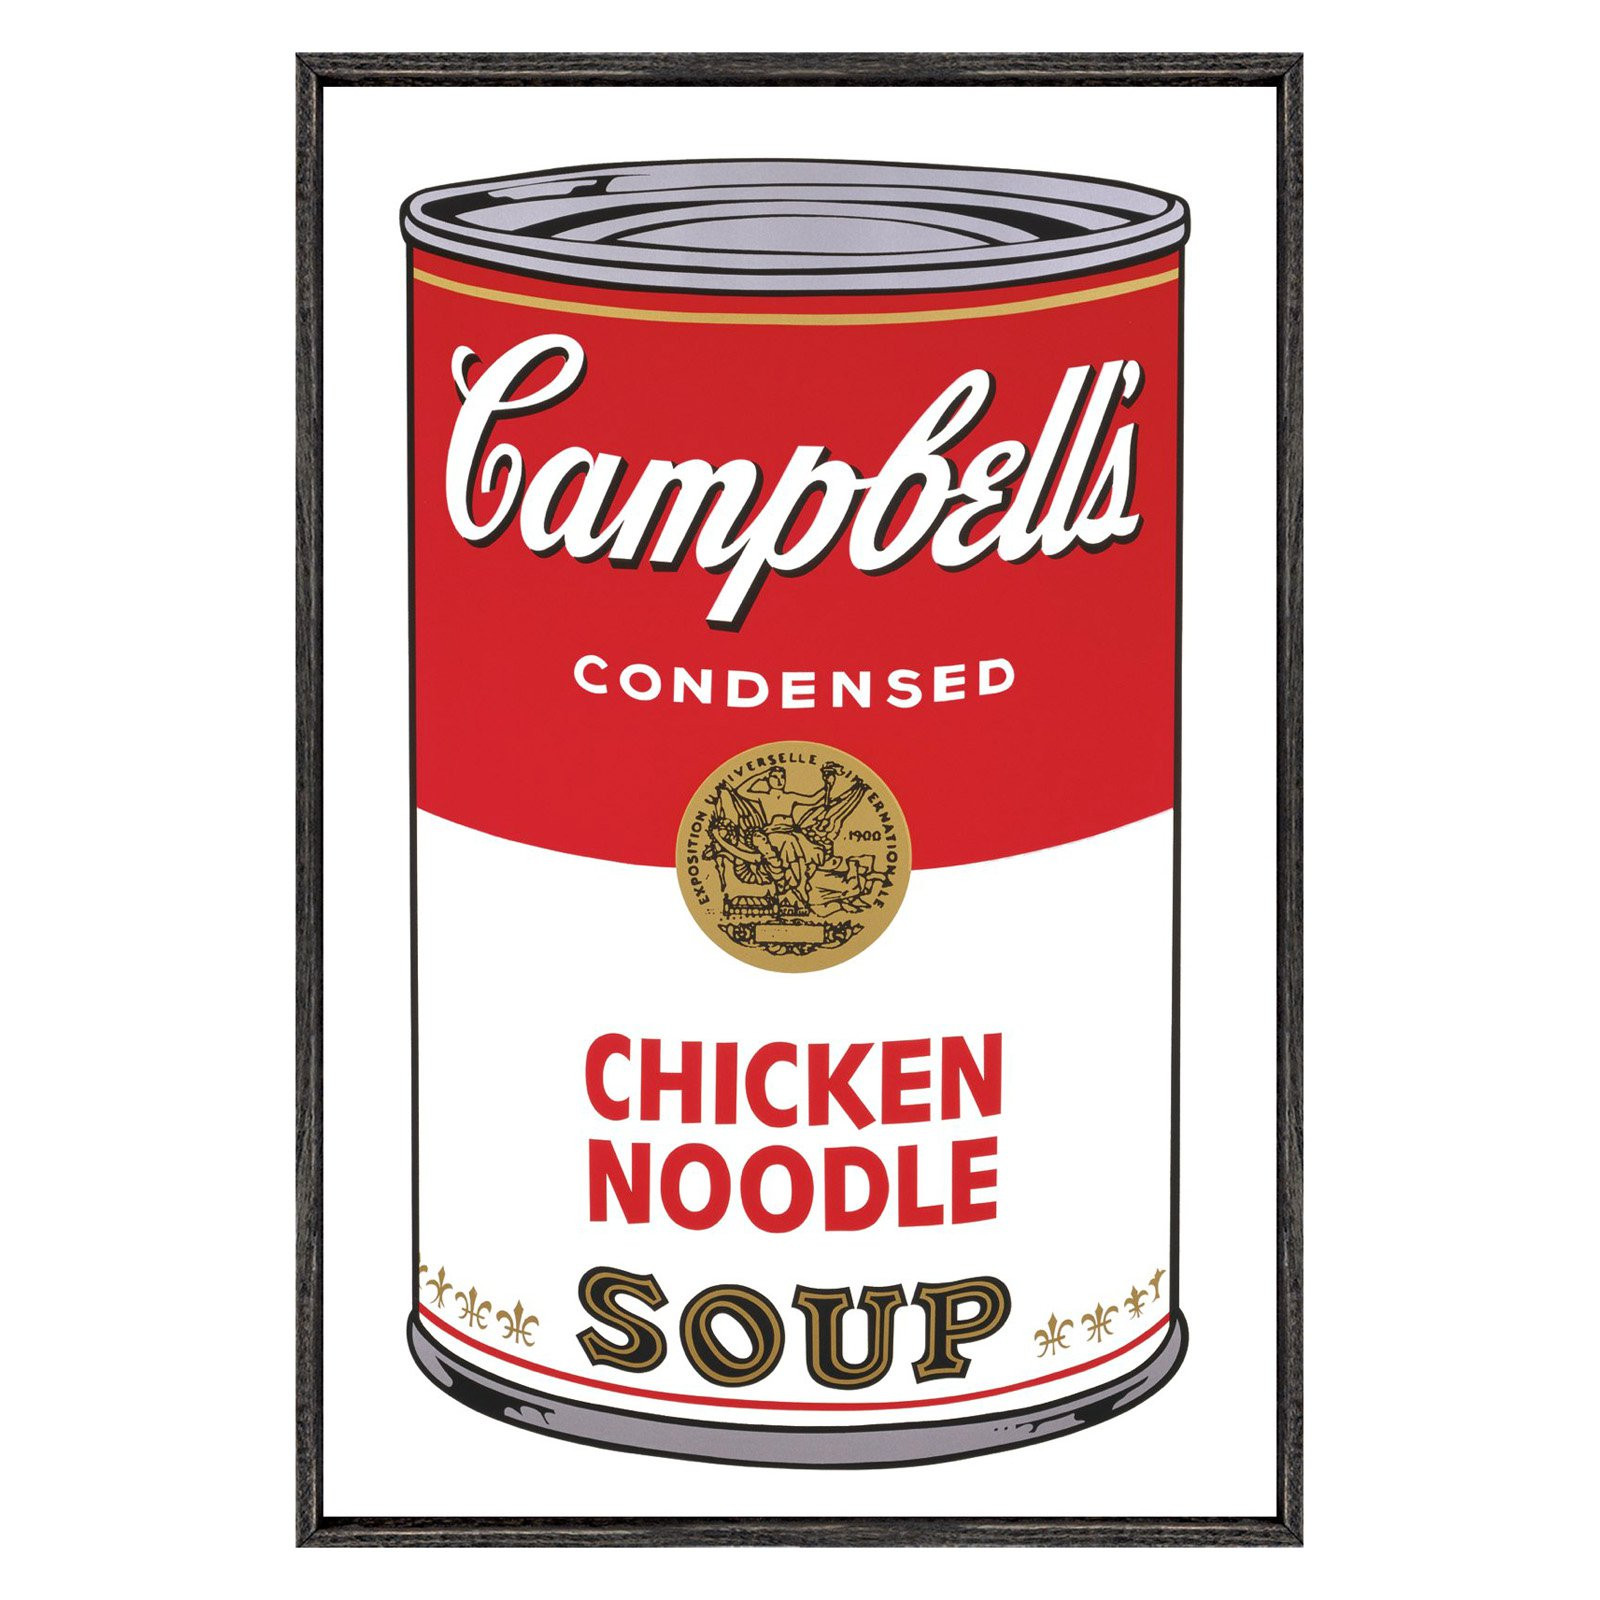 Campbell Chicken Noodle Soup
 Campbells Soup I Chicken Noodle 1968 18 x 12 in at